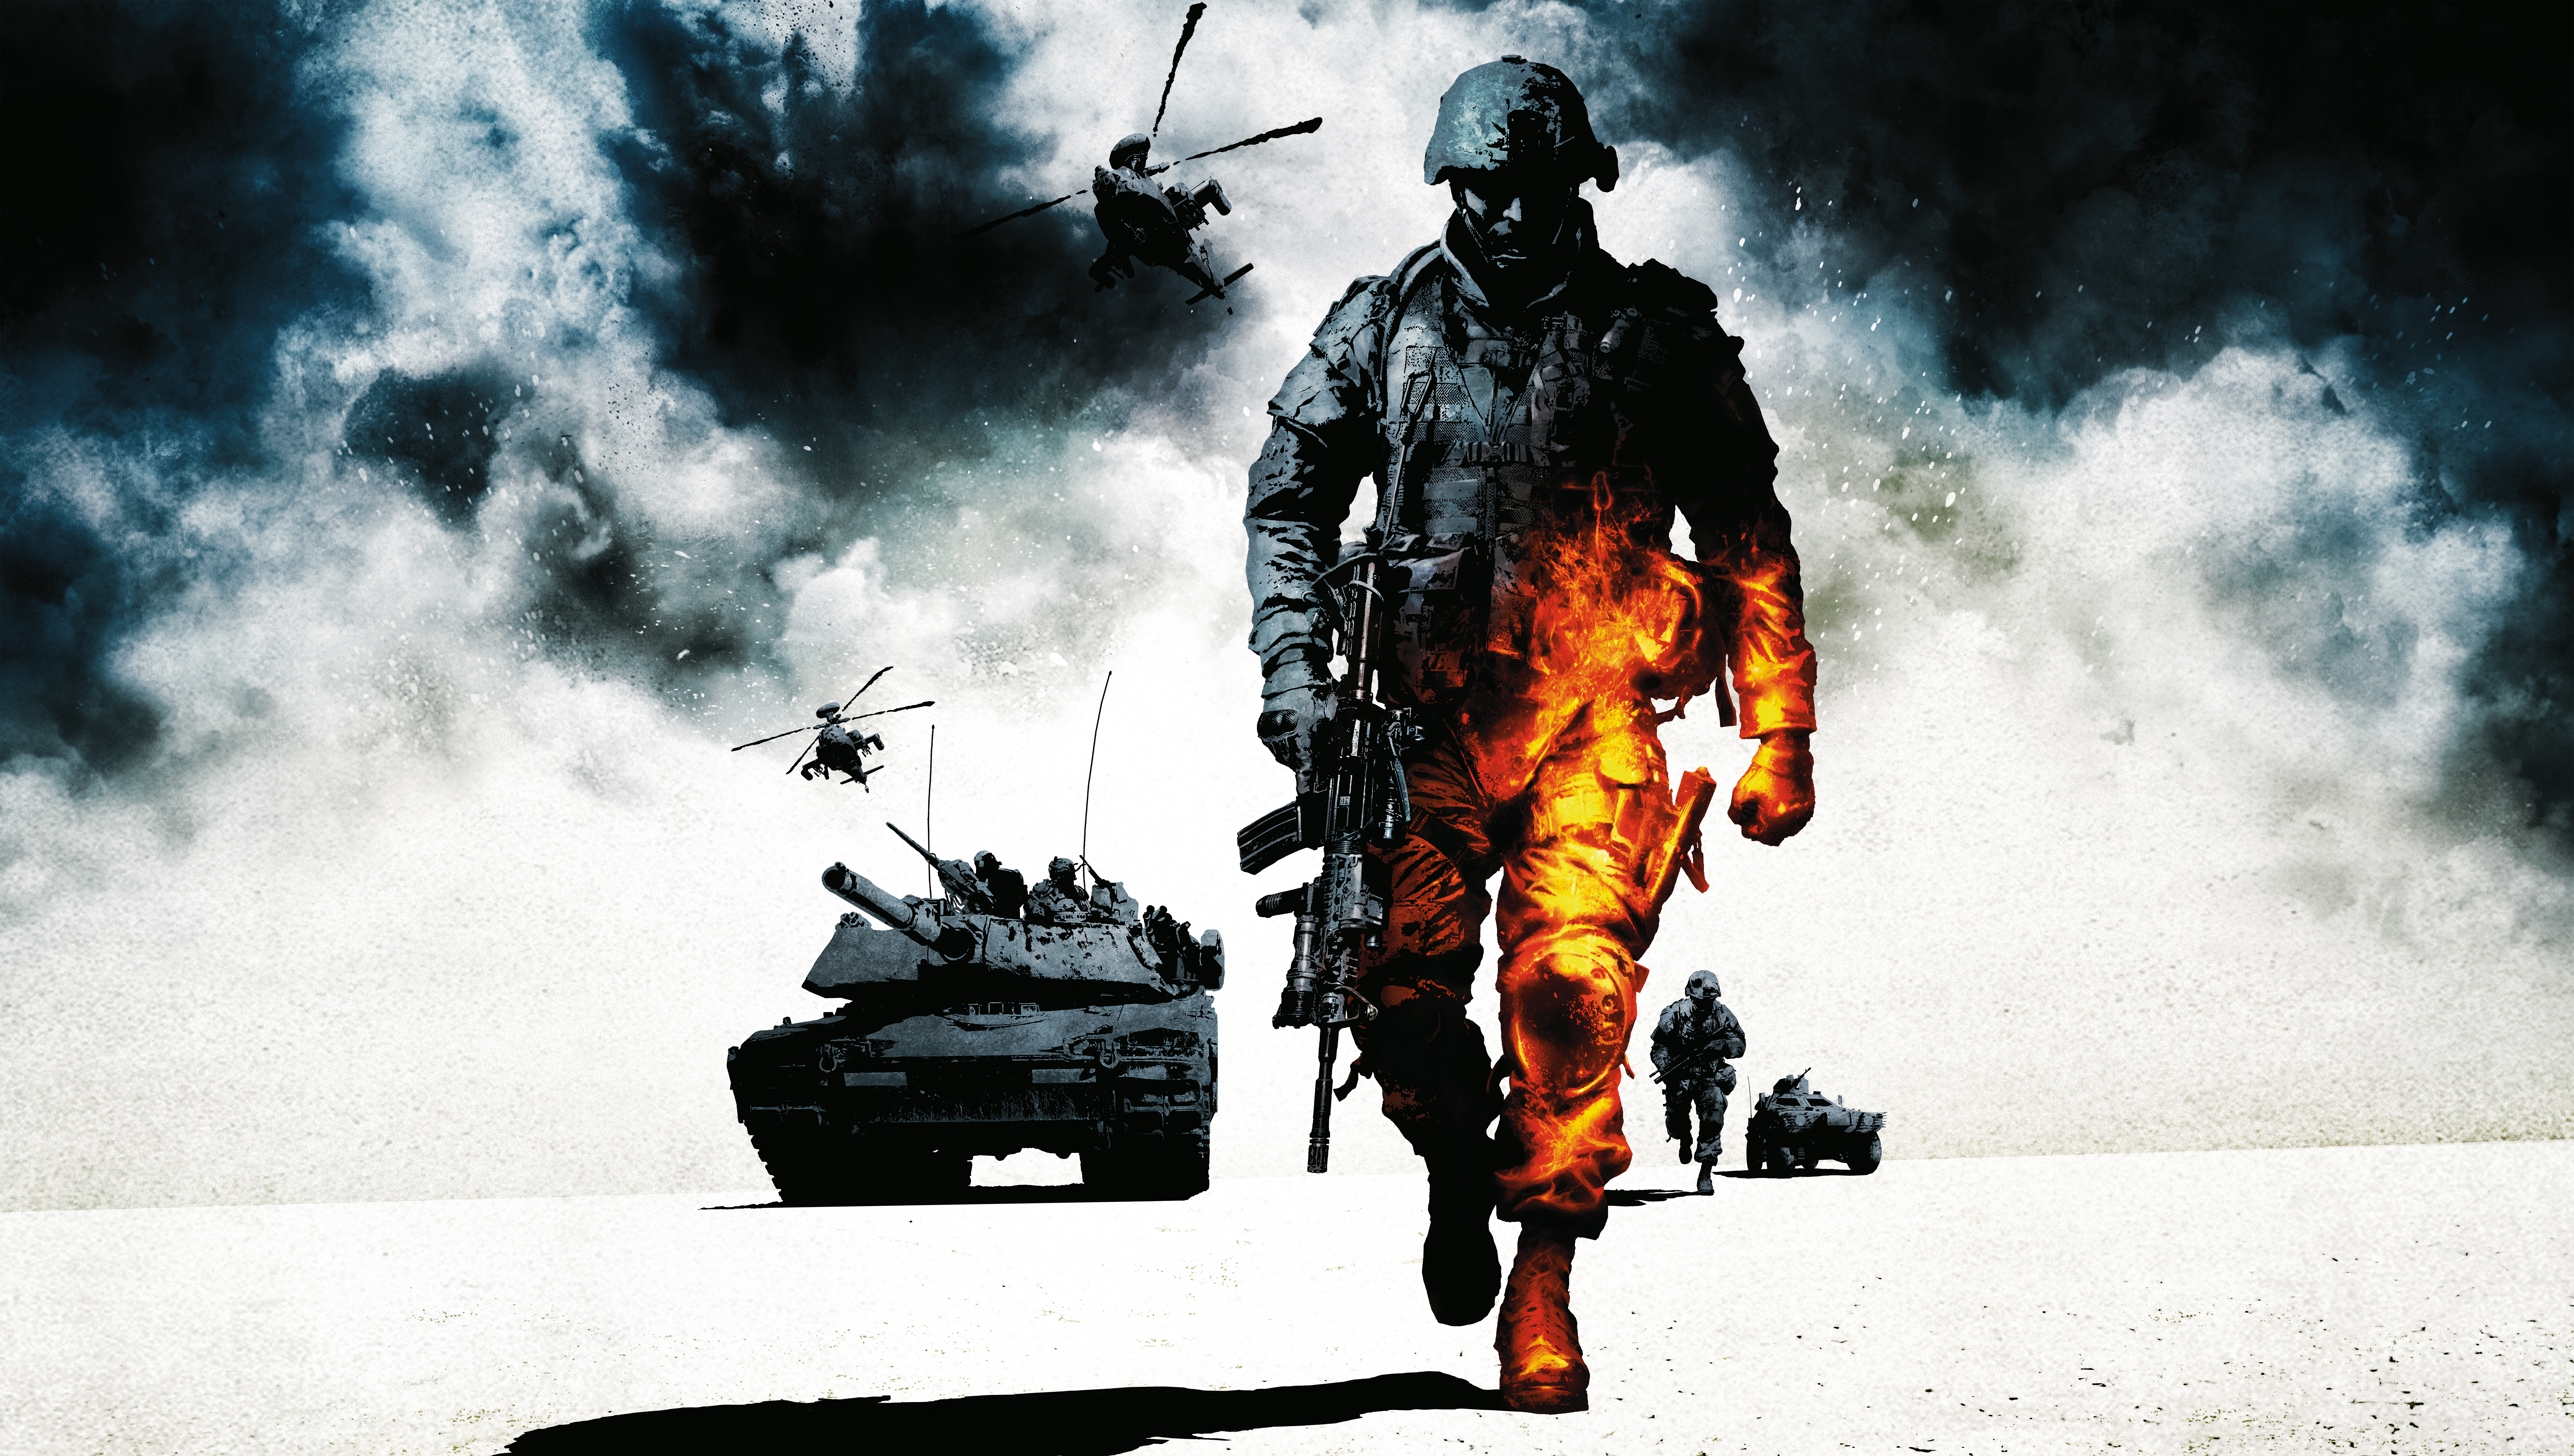 does people still play battlefield bad company 2 online